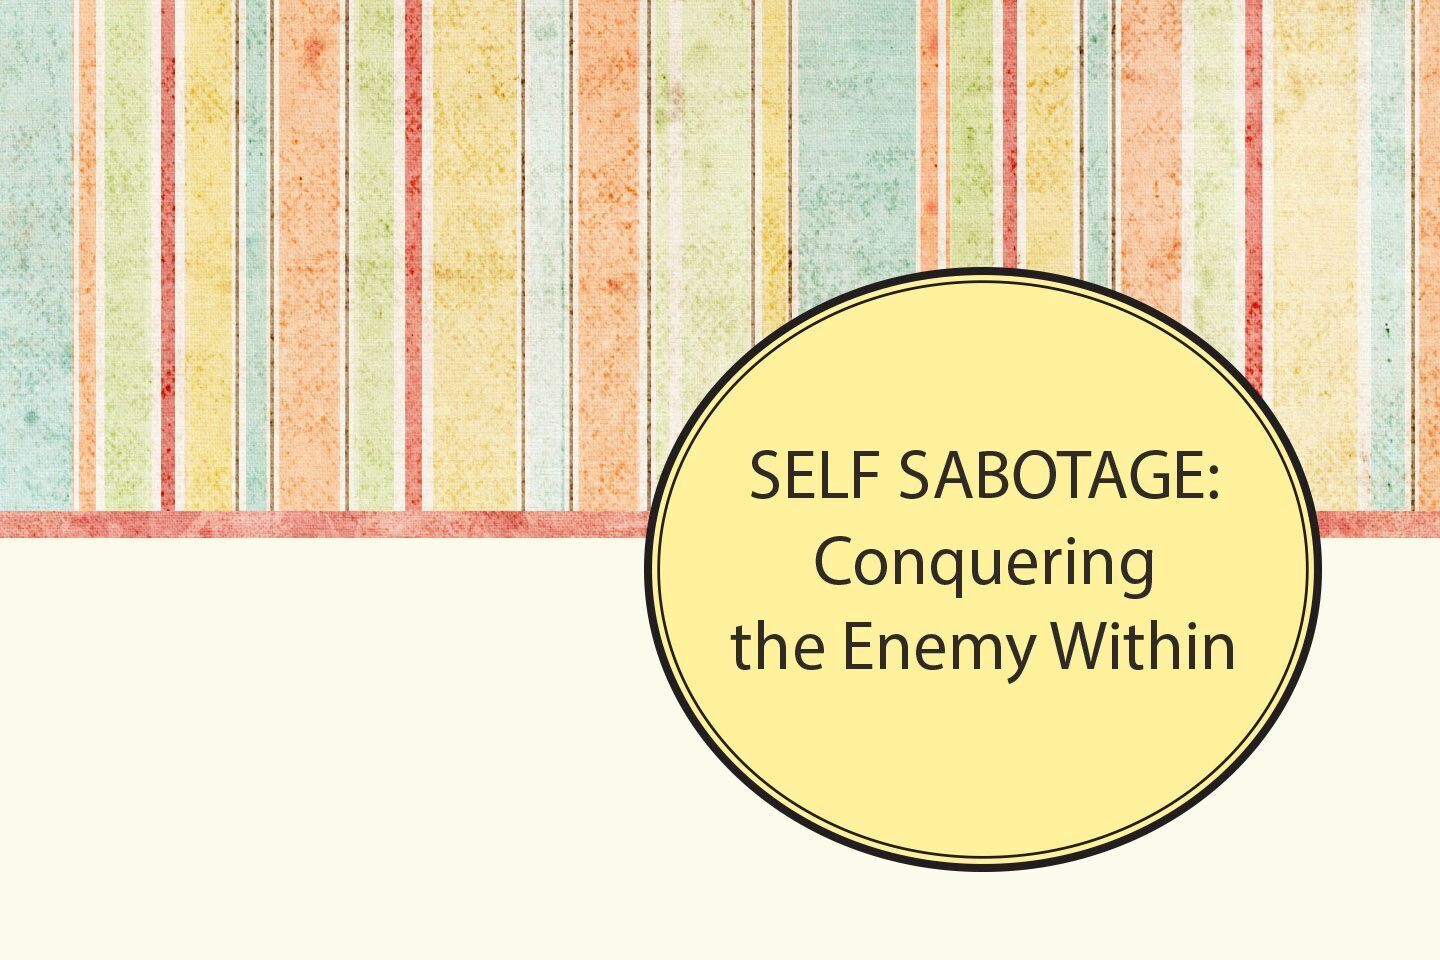 Self-Sabotage: Conquering the Enemy Within.